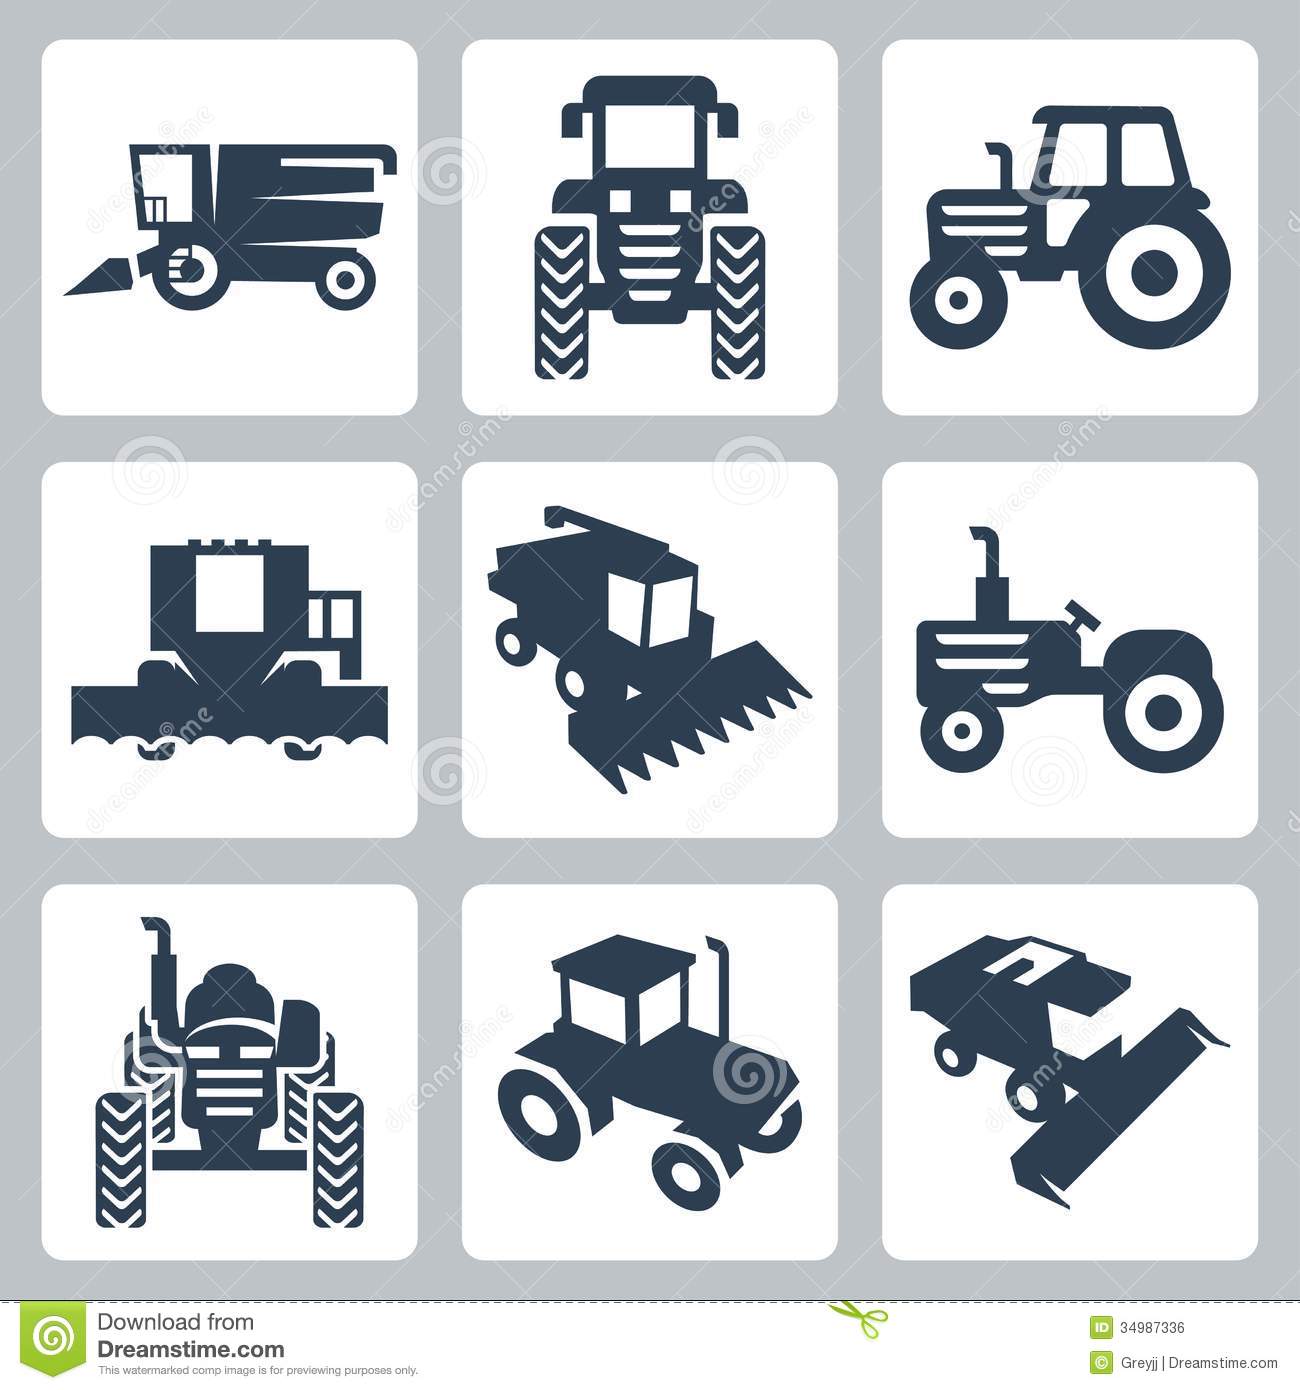 Vector Tractor And Combine Harvester Icons Royalty Free Stock Image